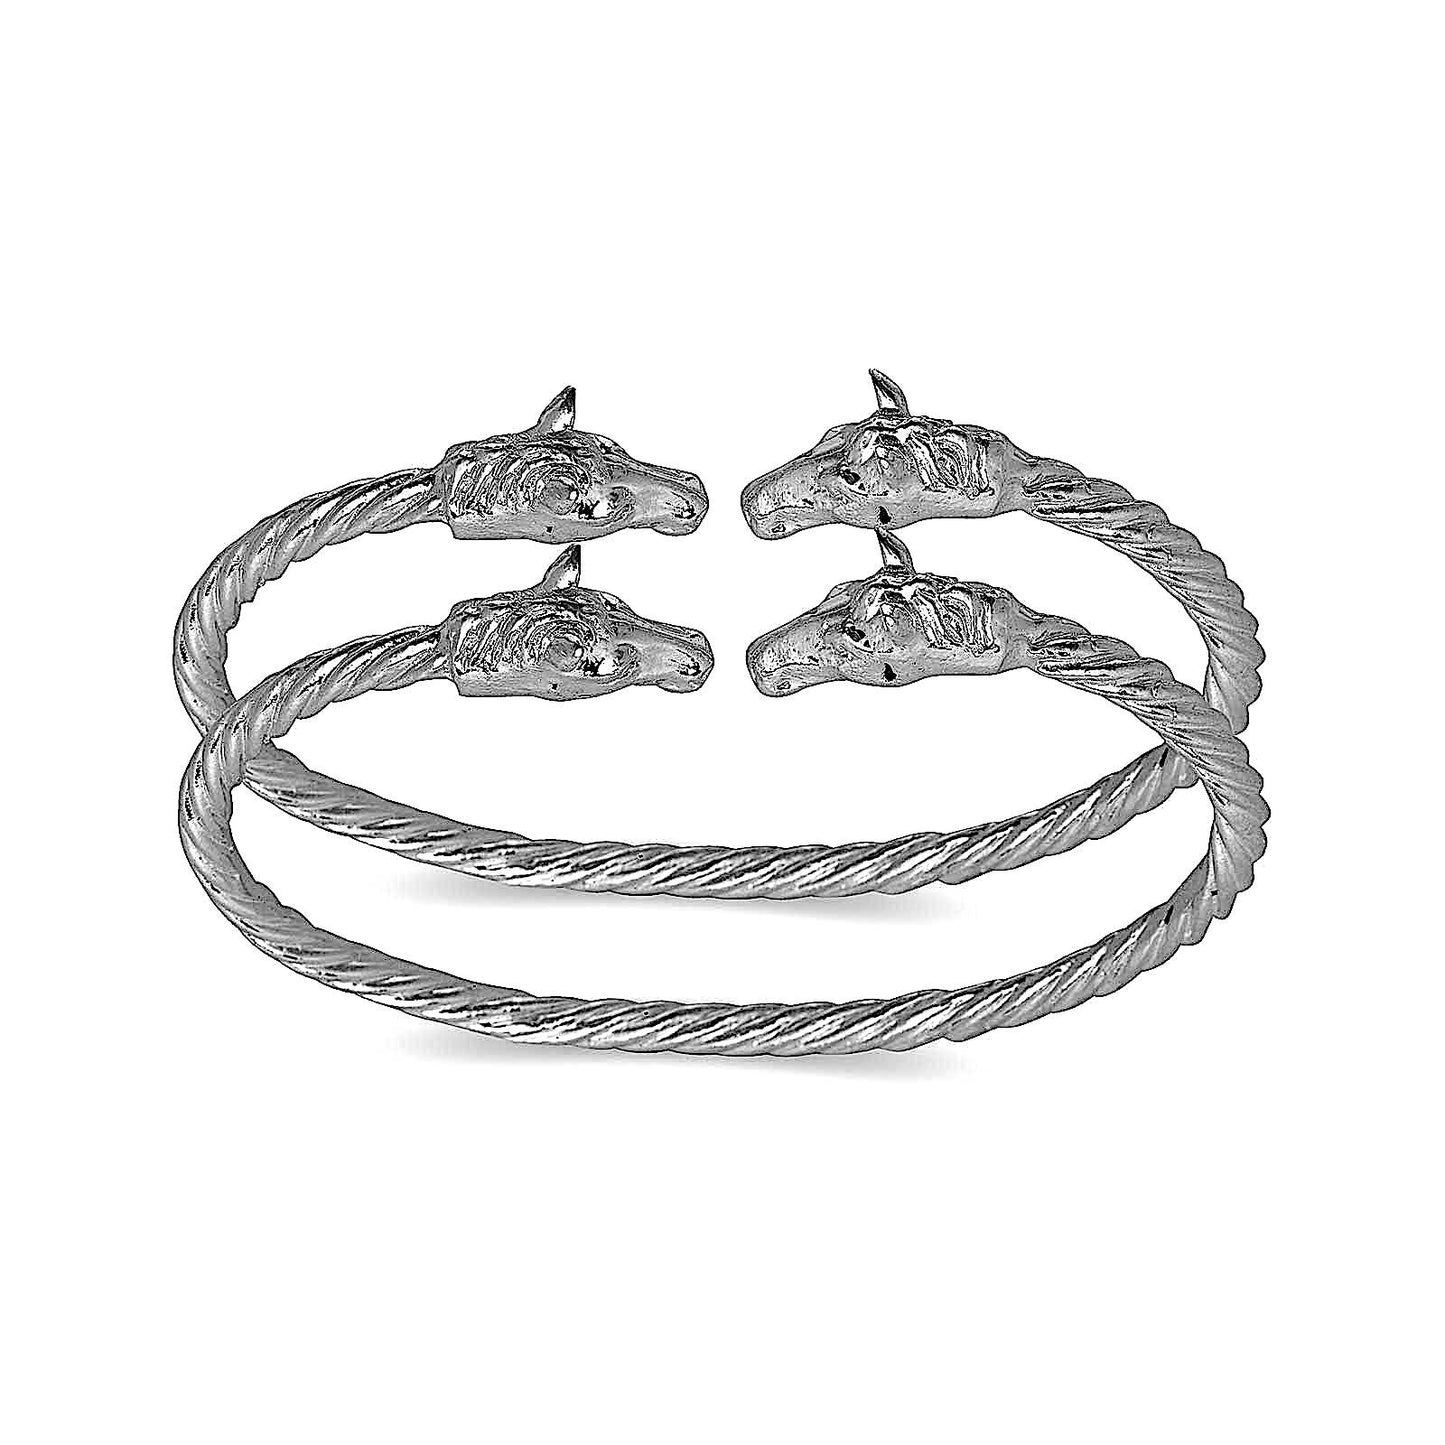 Horse ends coiled rope West Indian bangles .925 Sterling silver (MADE IN USA)  (pair) - Betterjewelry